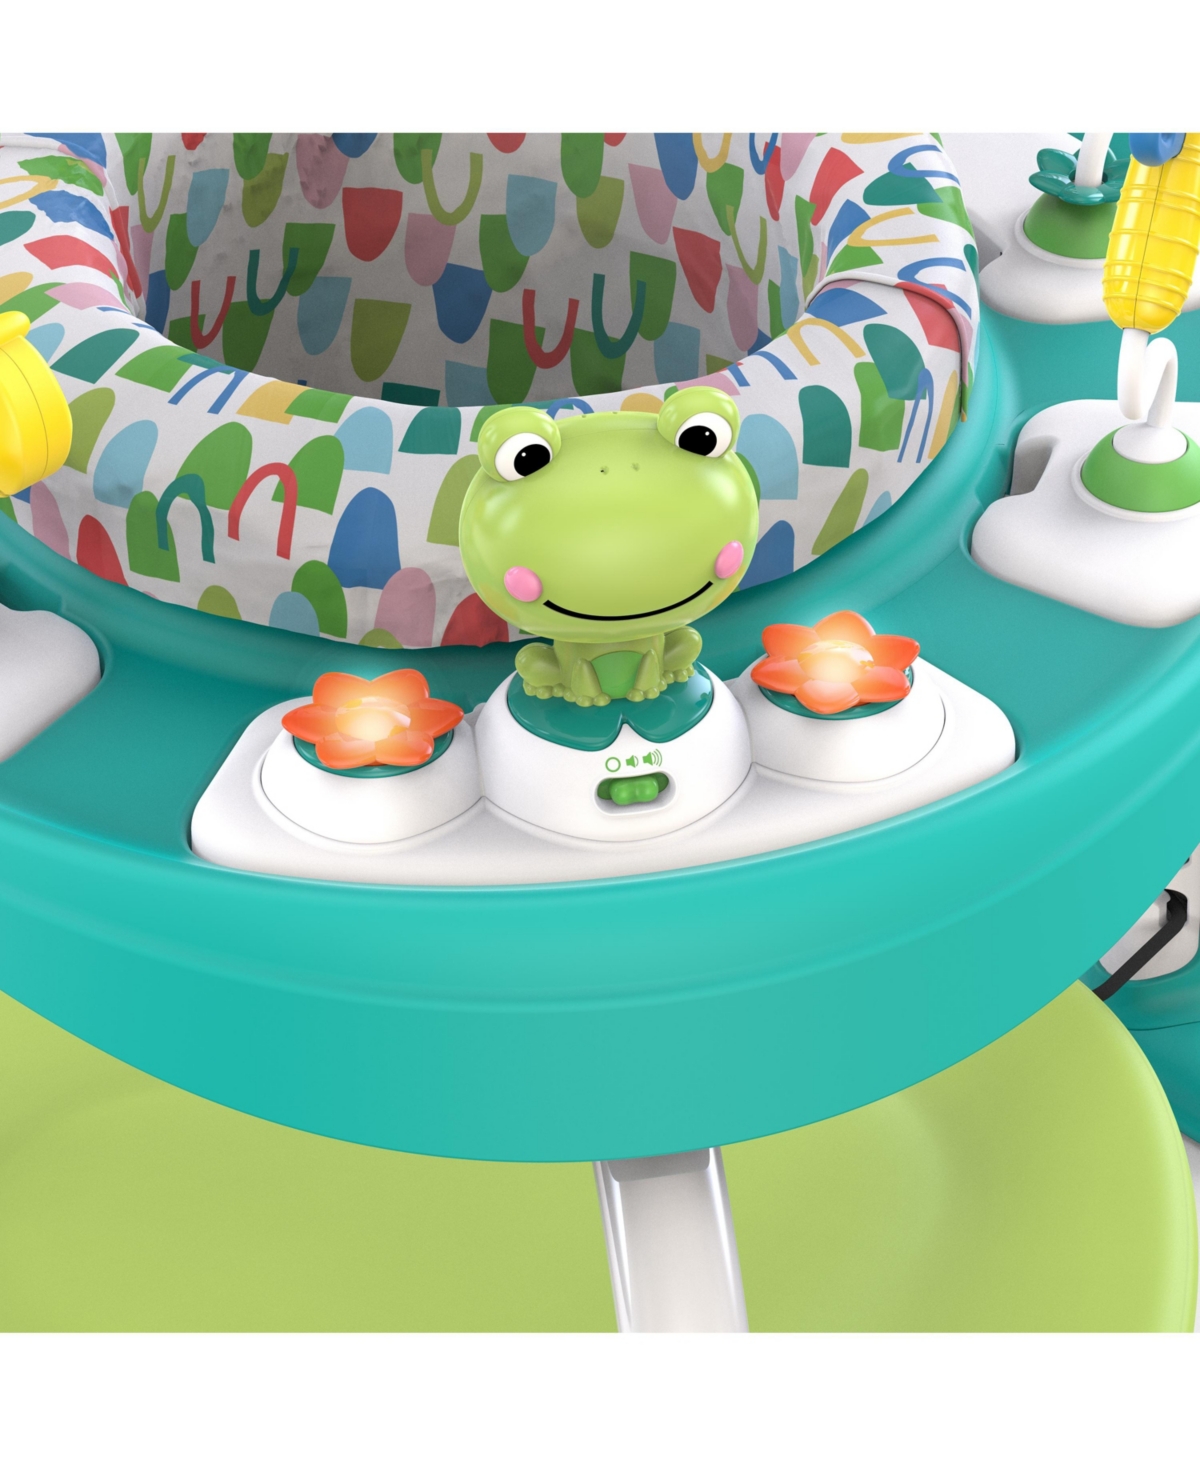 Shop Bright Starts Bounce Bounce Baby 2-in-1 Activity Jumper Table In Multi